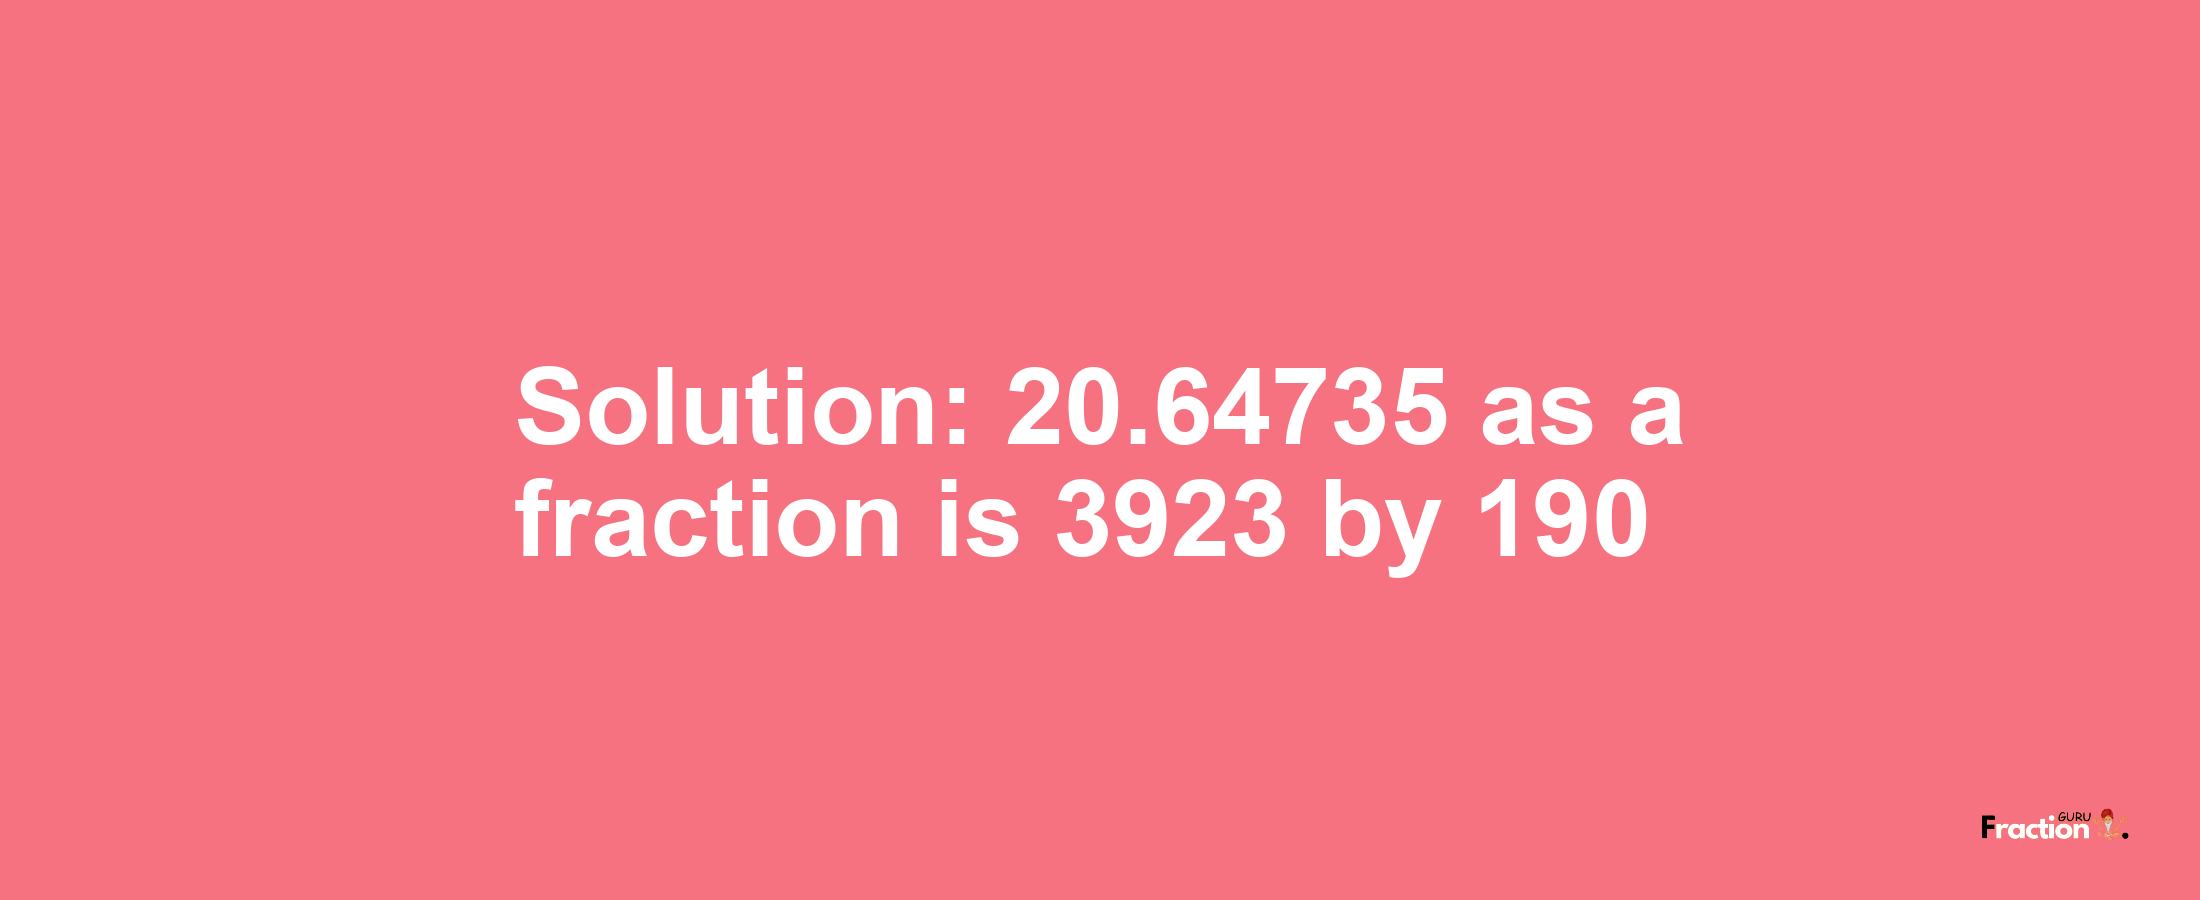 Solution:20.64735 as a fraction is 3923/190